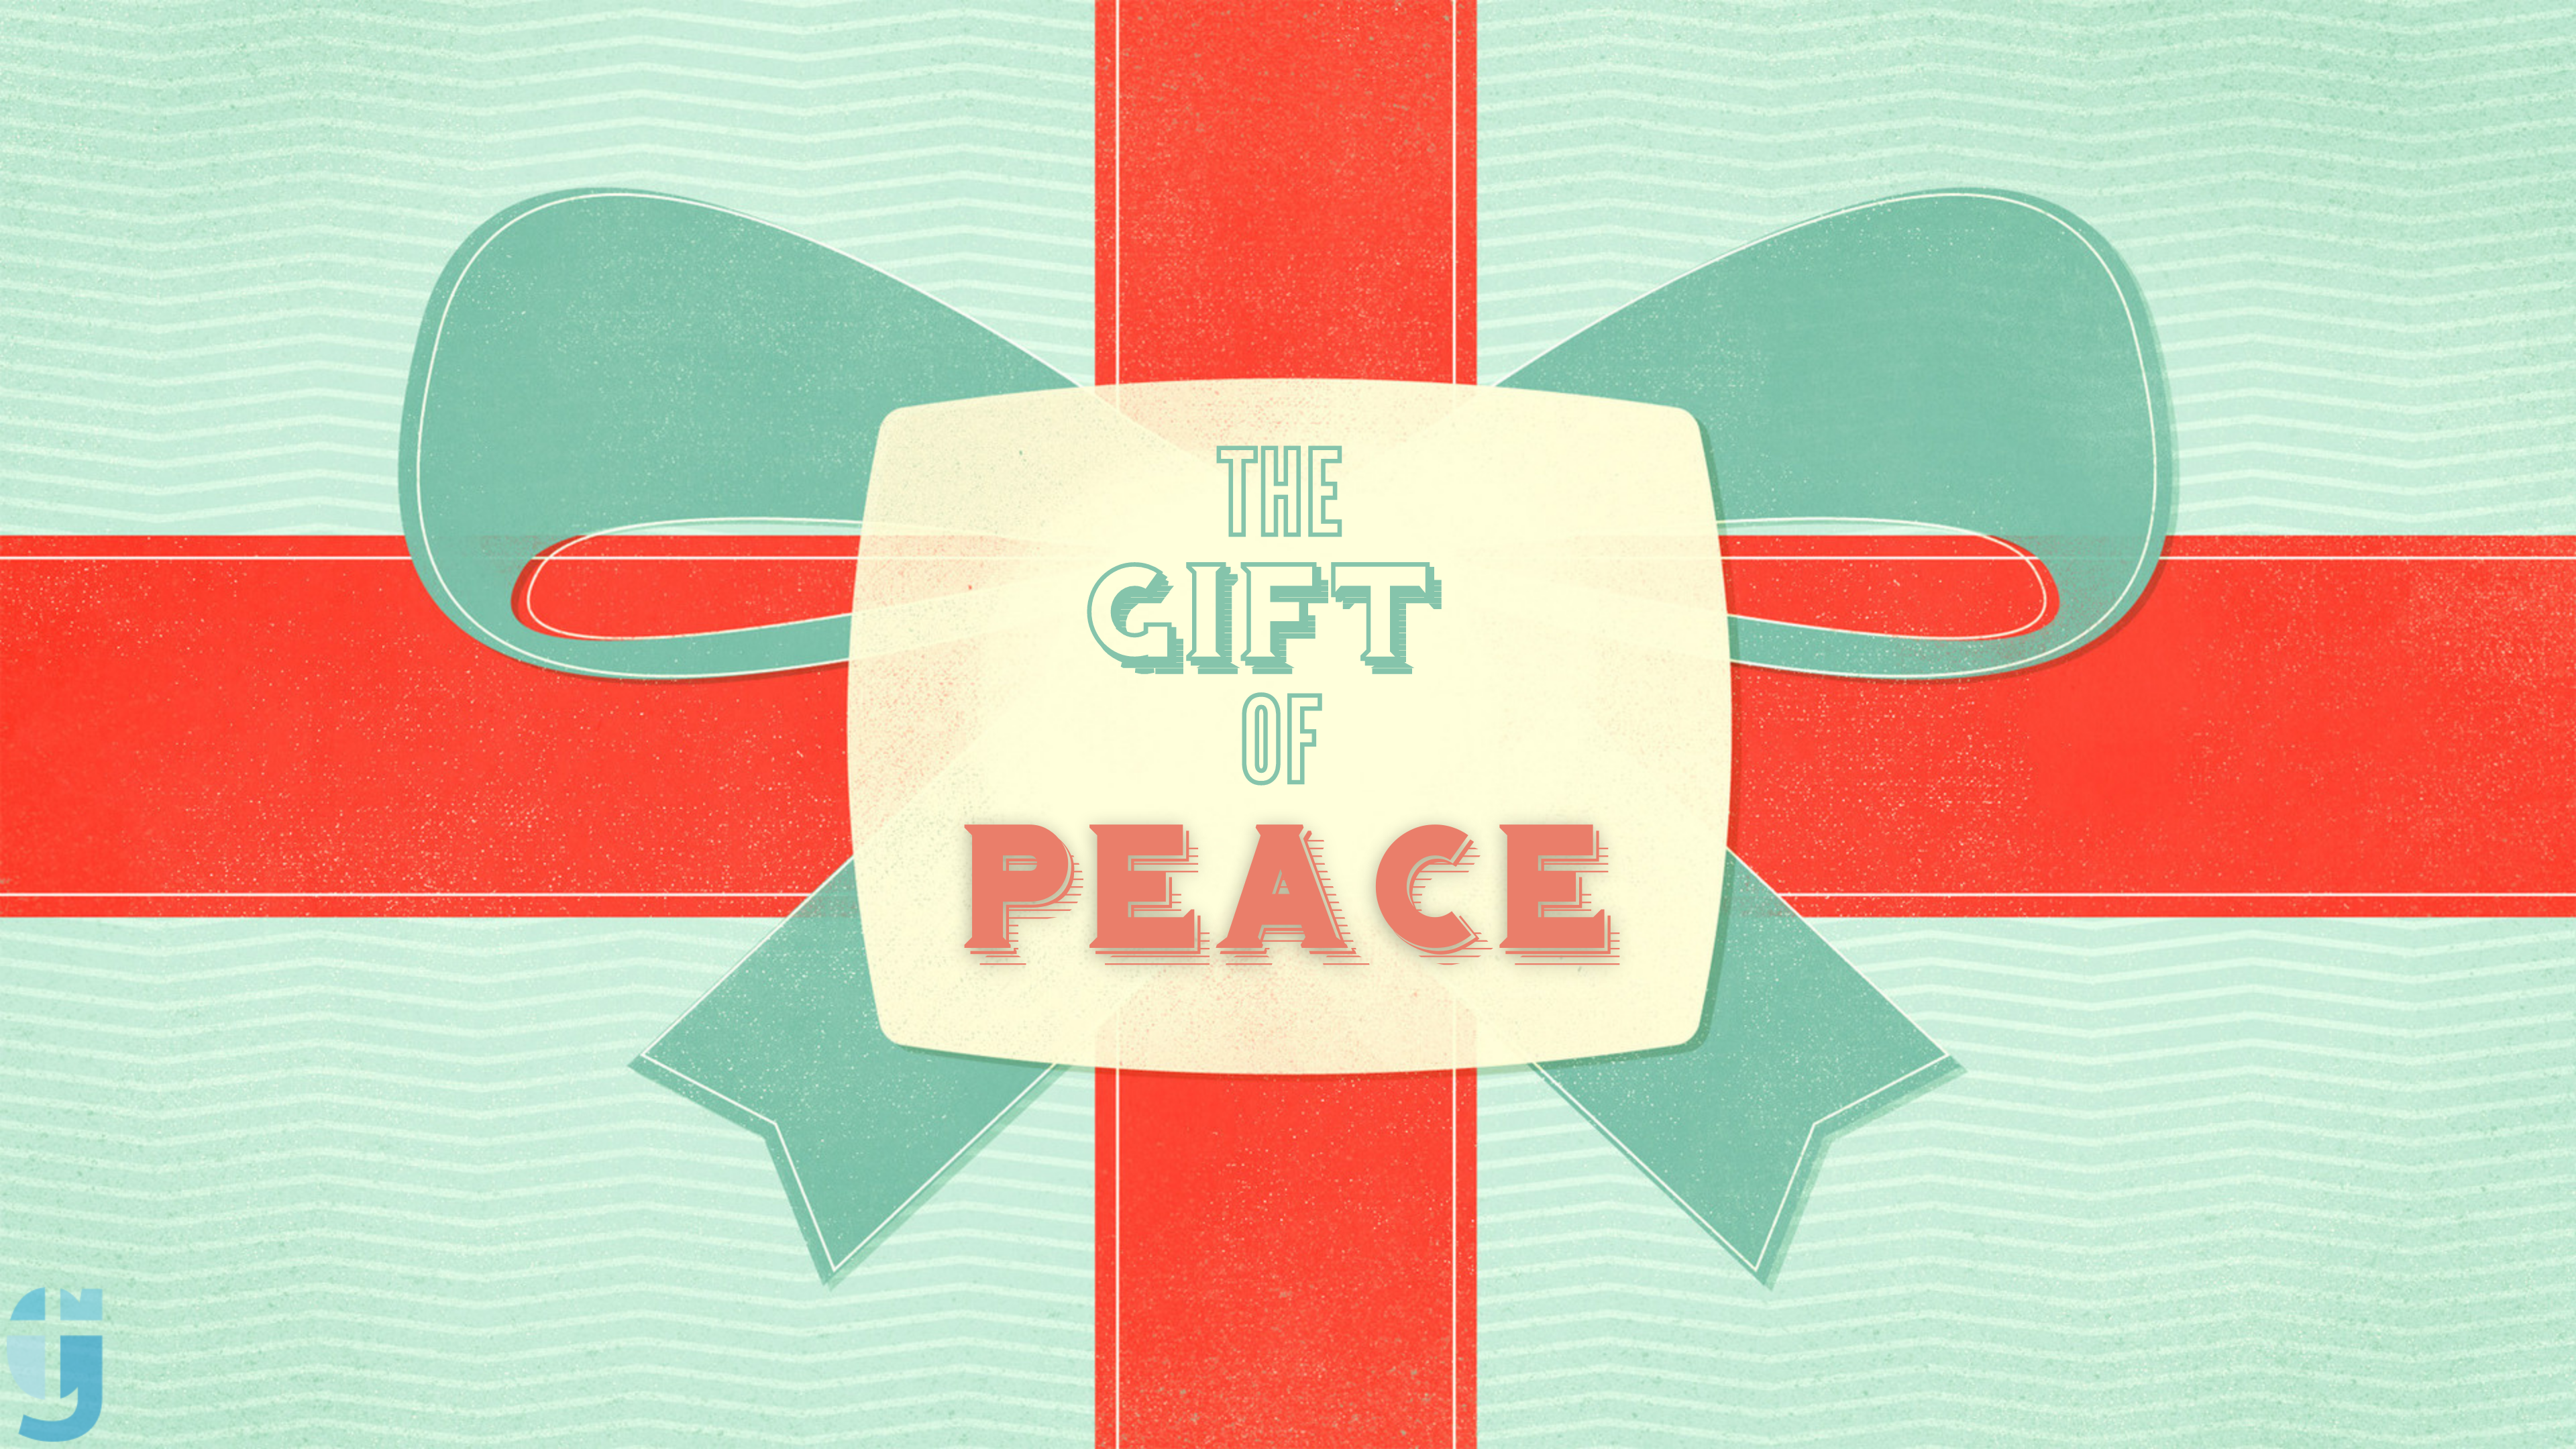 The Gifts of Advent: PEACE